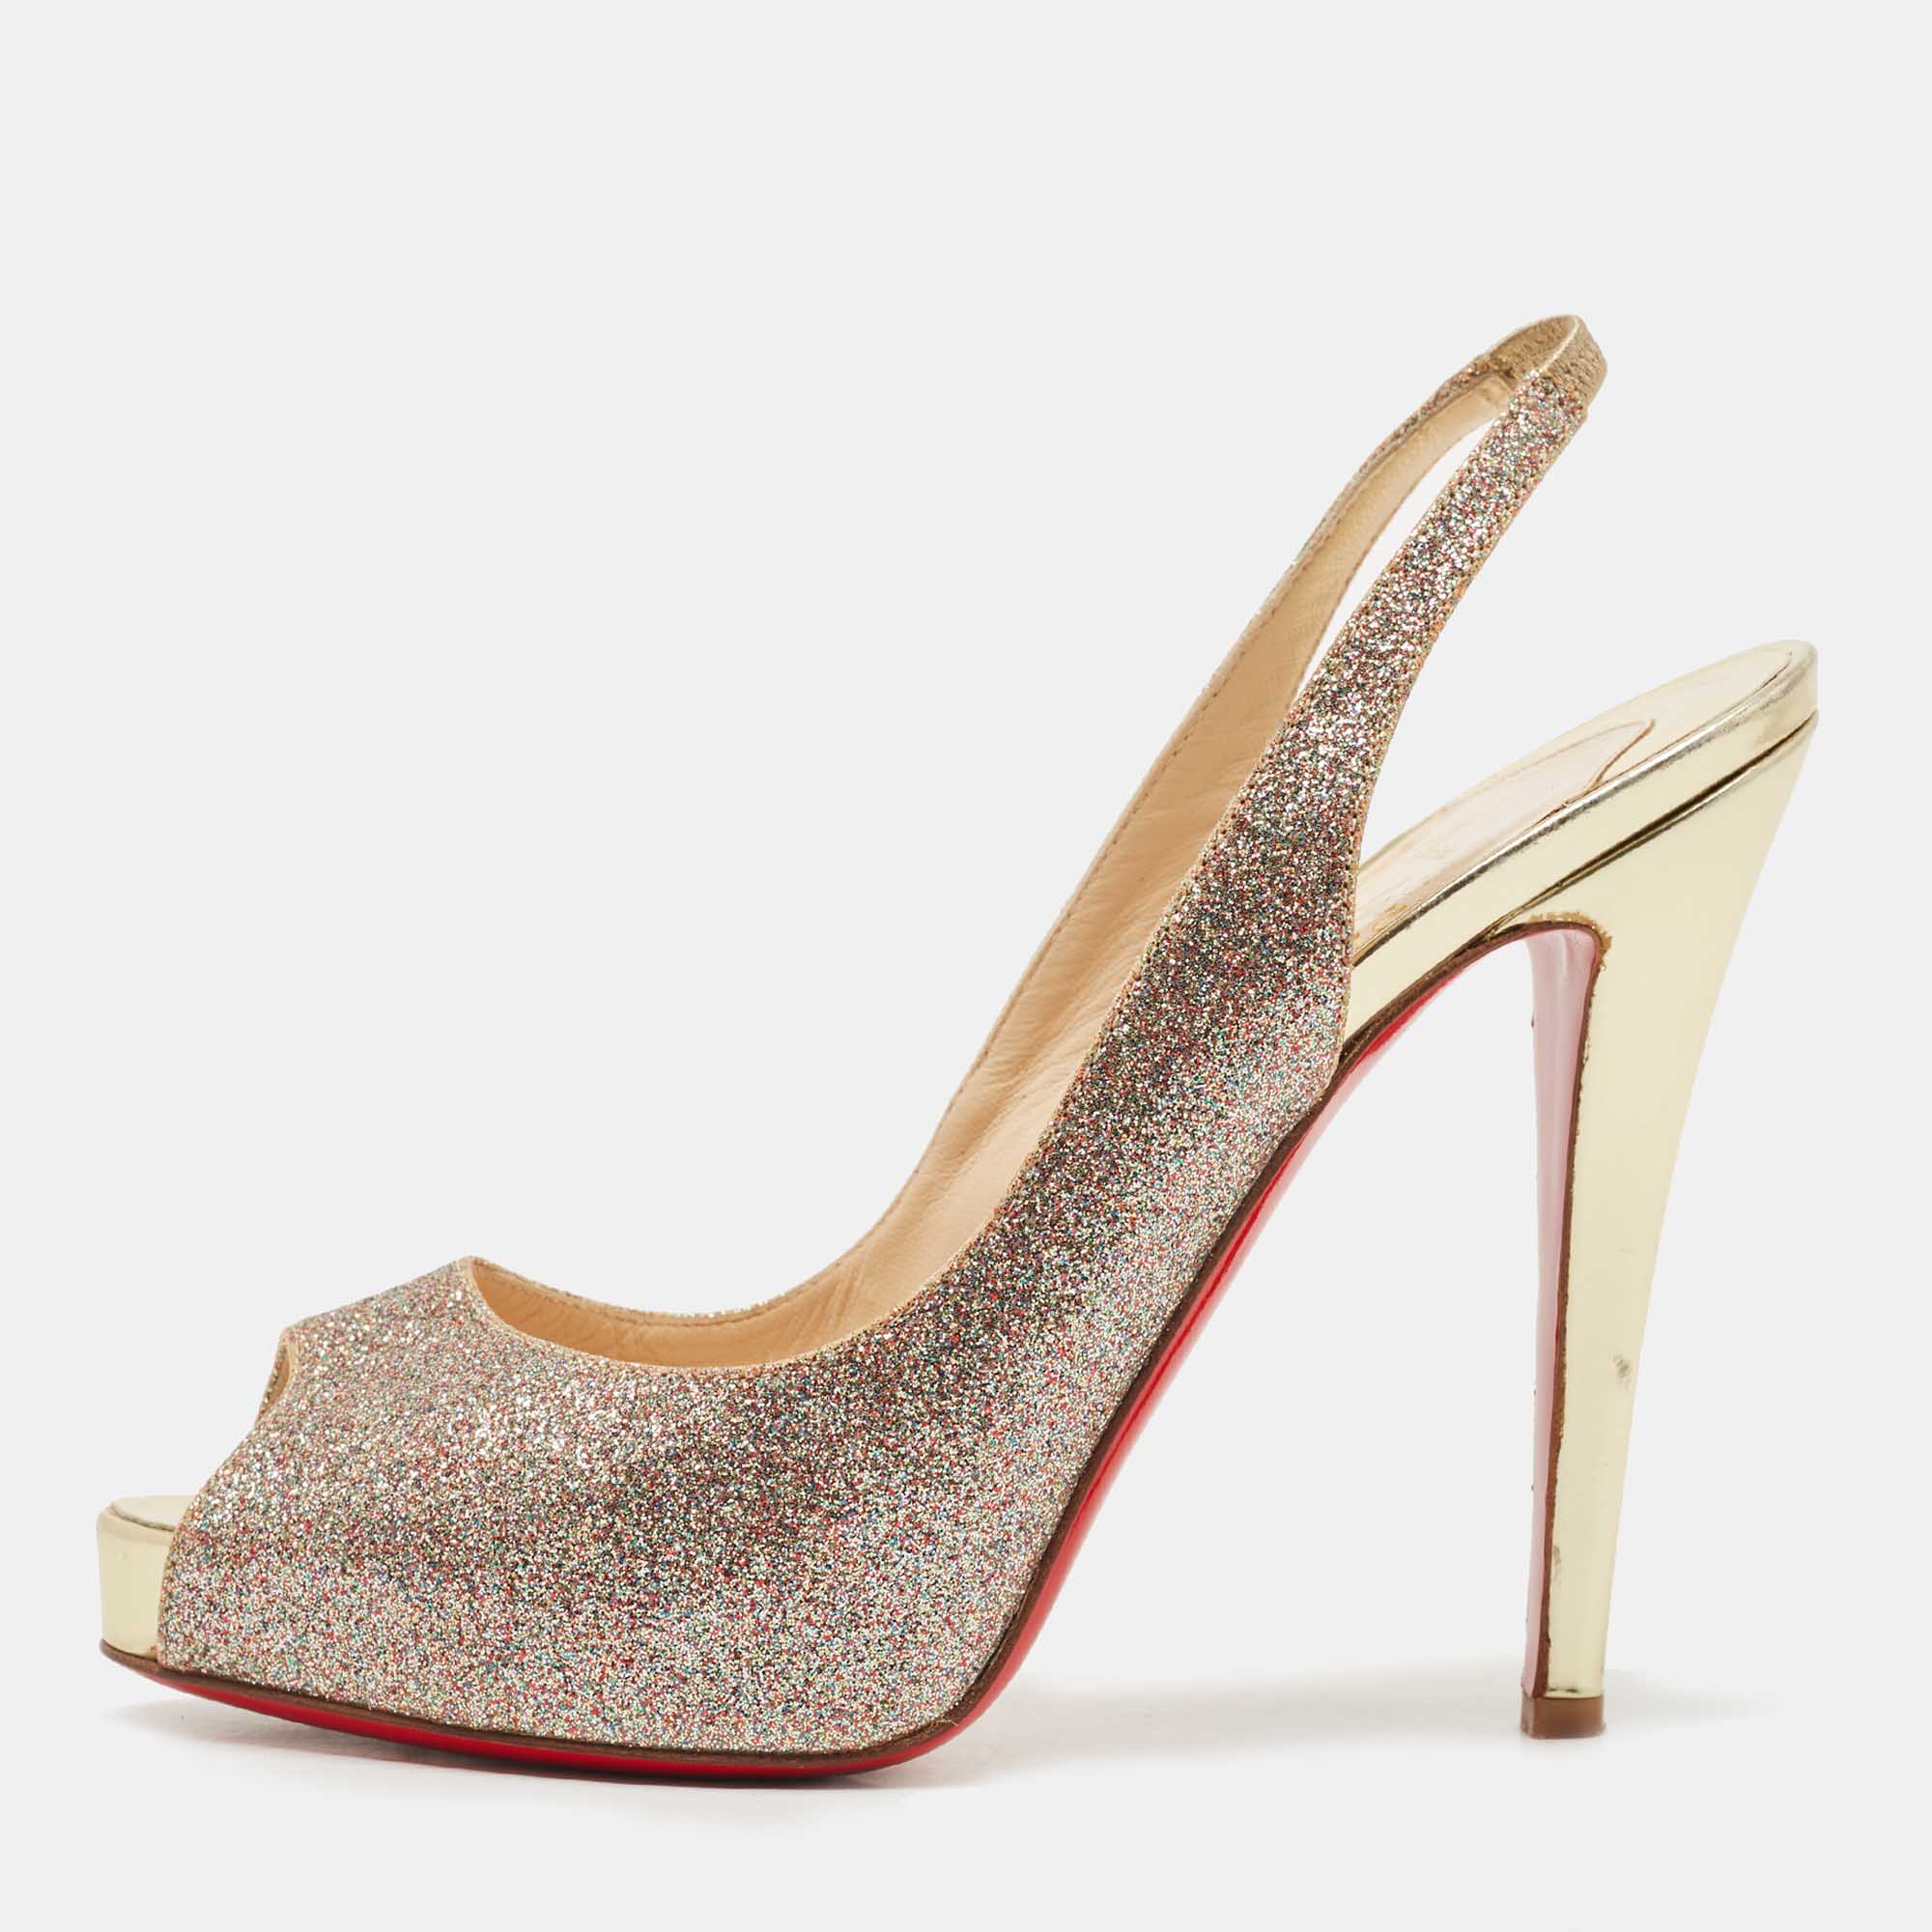 Christian Louboutin Metallic Gold Glitter Private Number Sandals Size 39